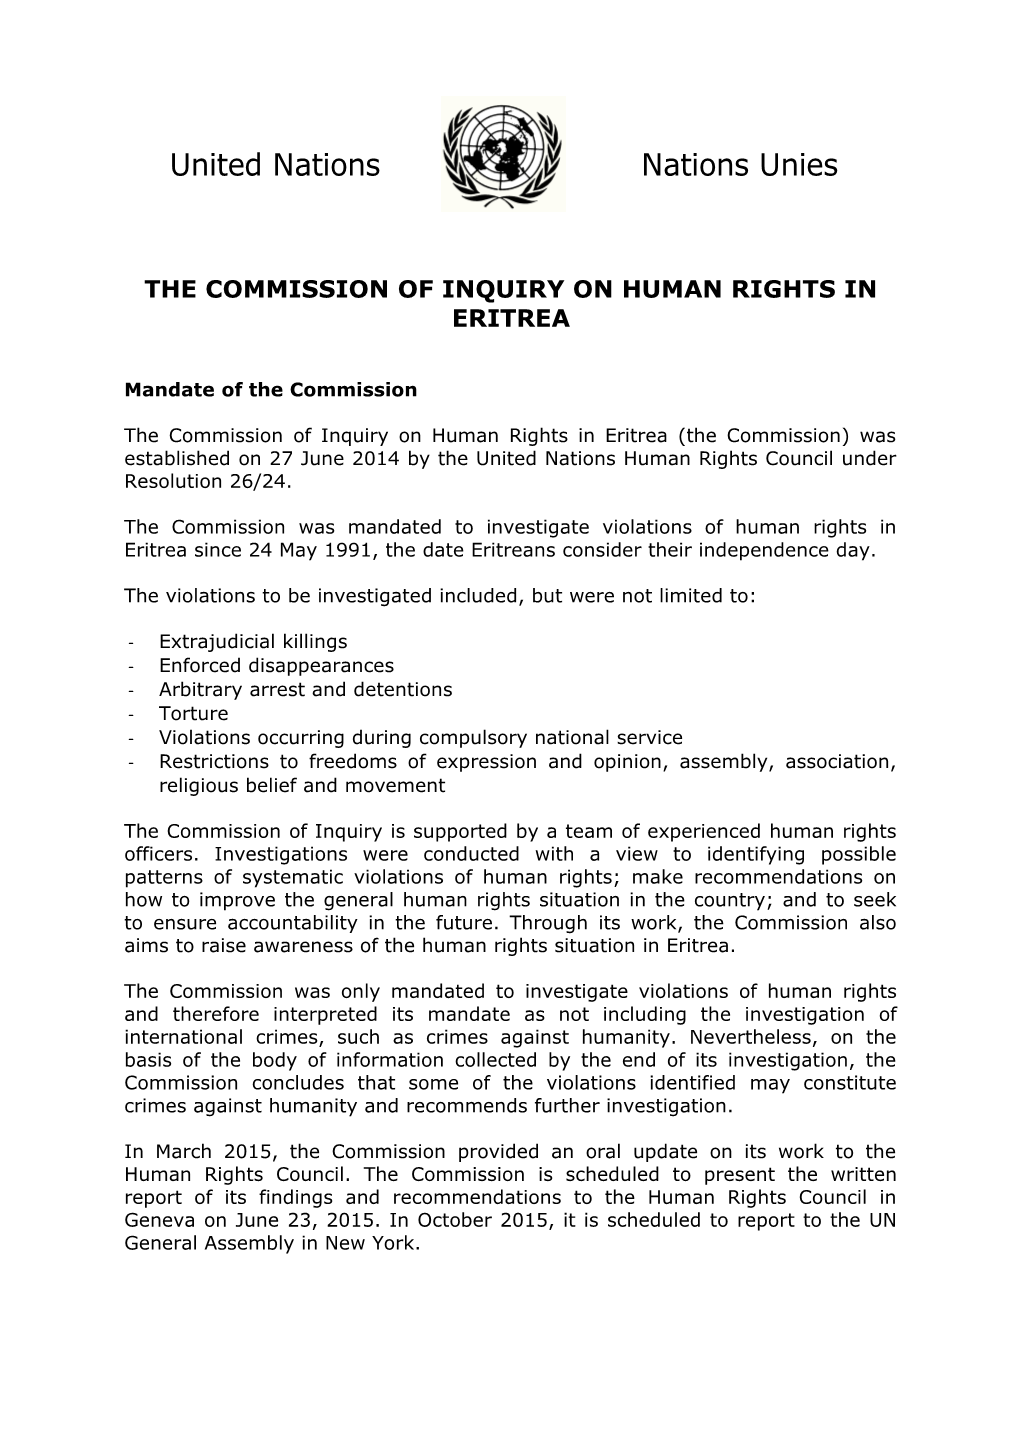 The Commission of Inquiry on Human Rights in Eritrea